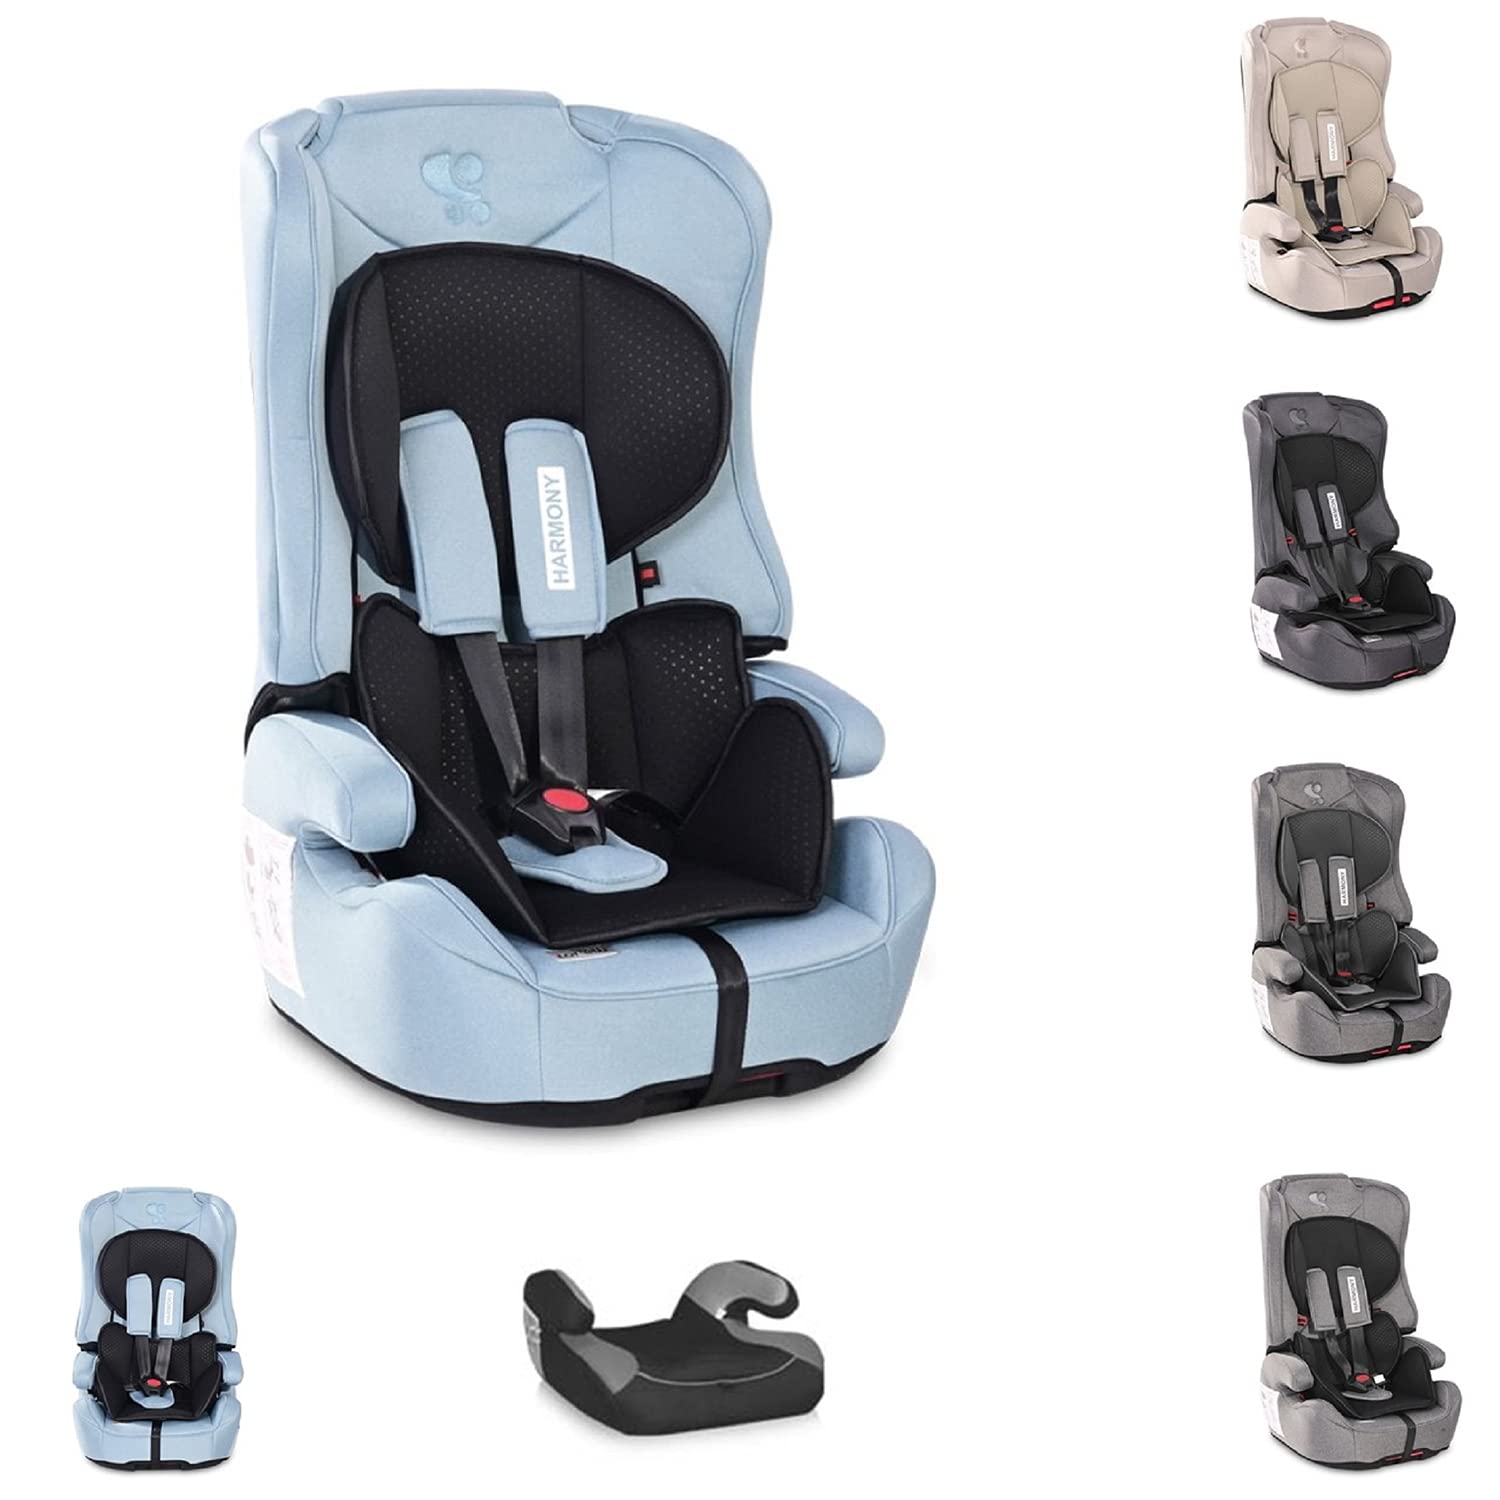 Lorelli Harmony Isofix Child Seat Group 1/2/3 (9-36 kg) Convertible Booster